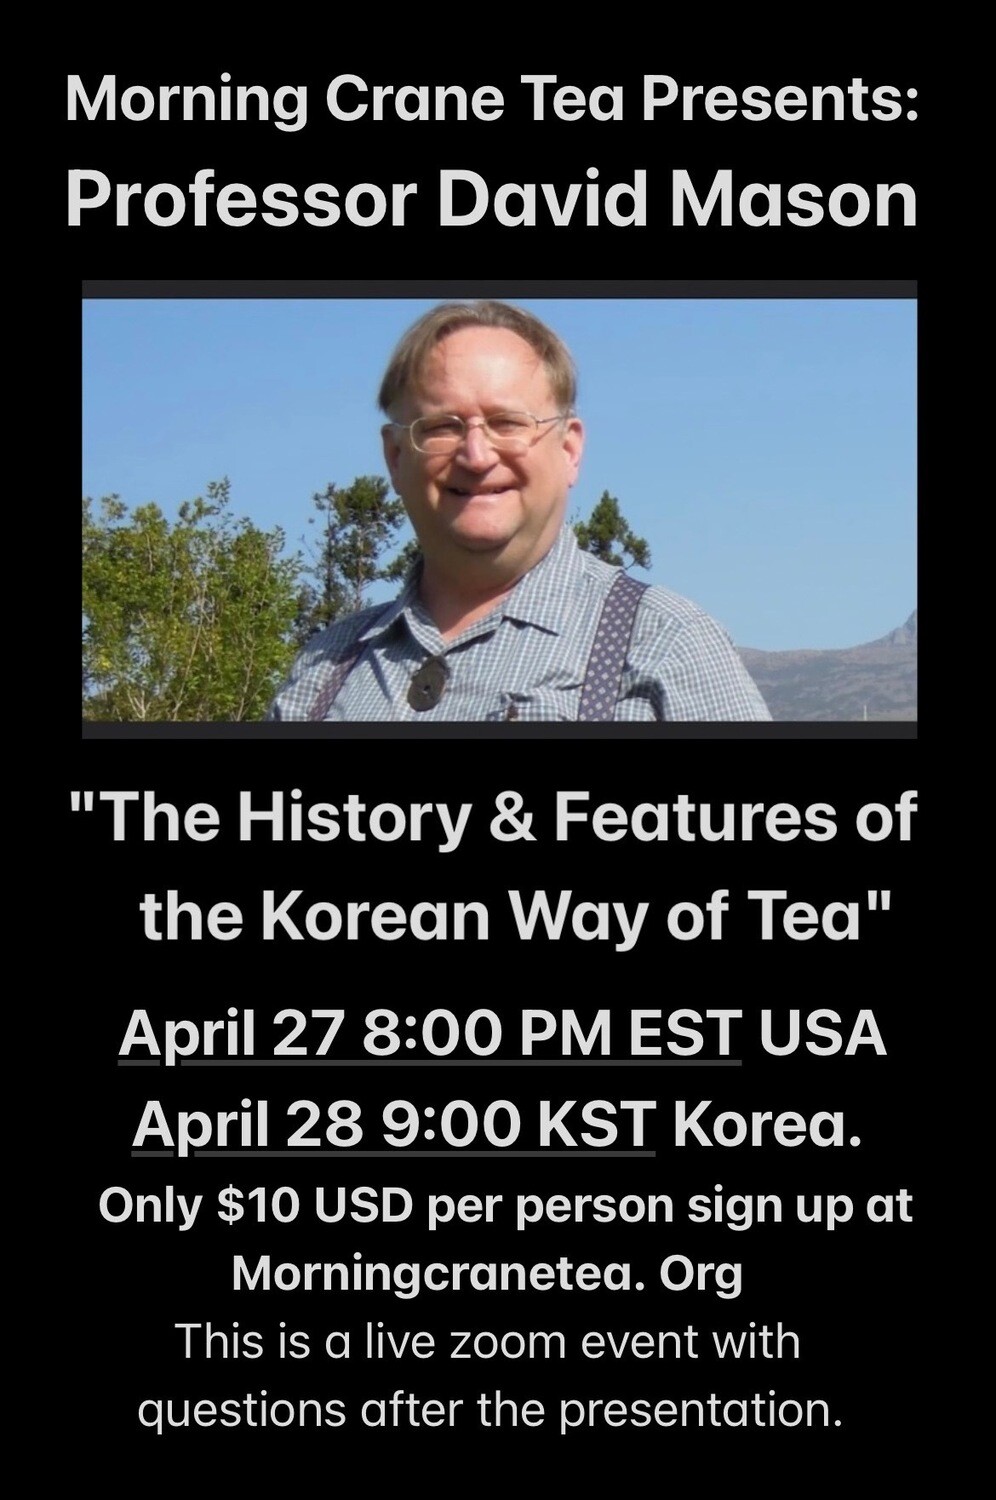 The History & Features of the Korean Way of Tea